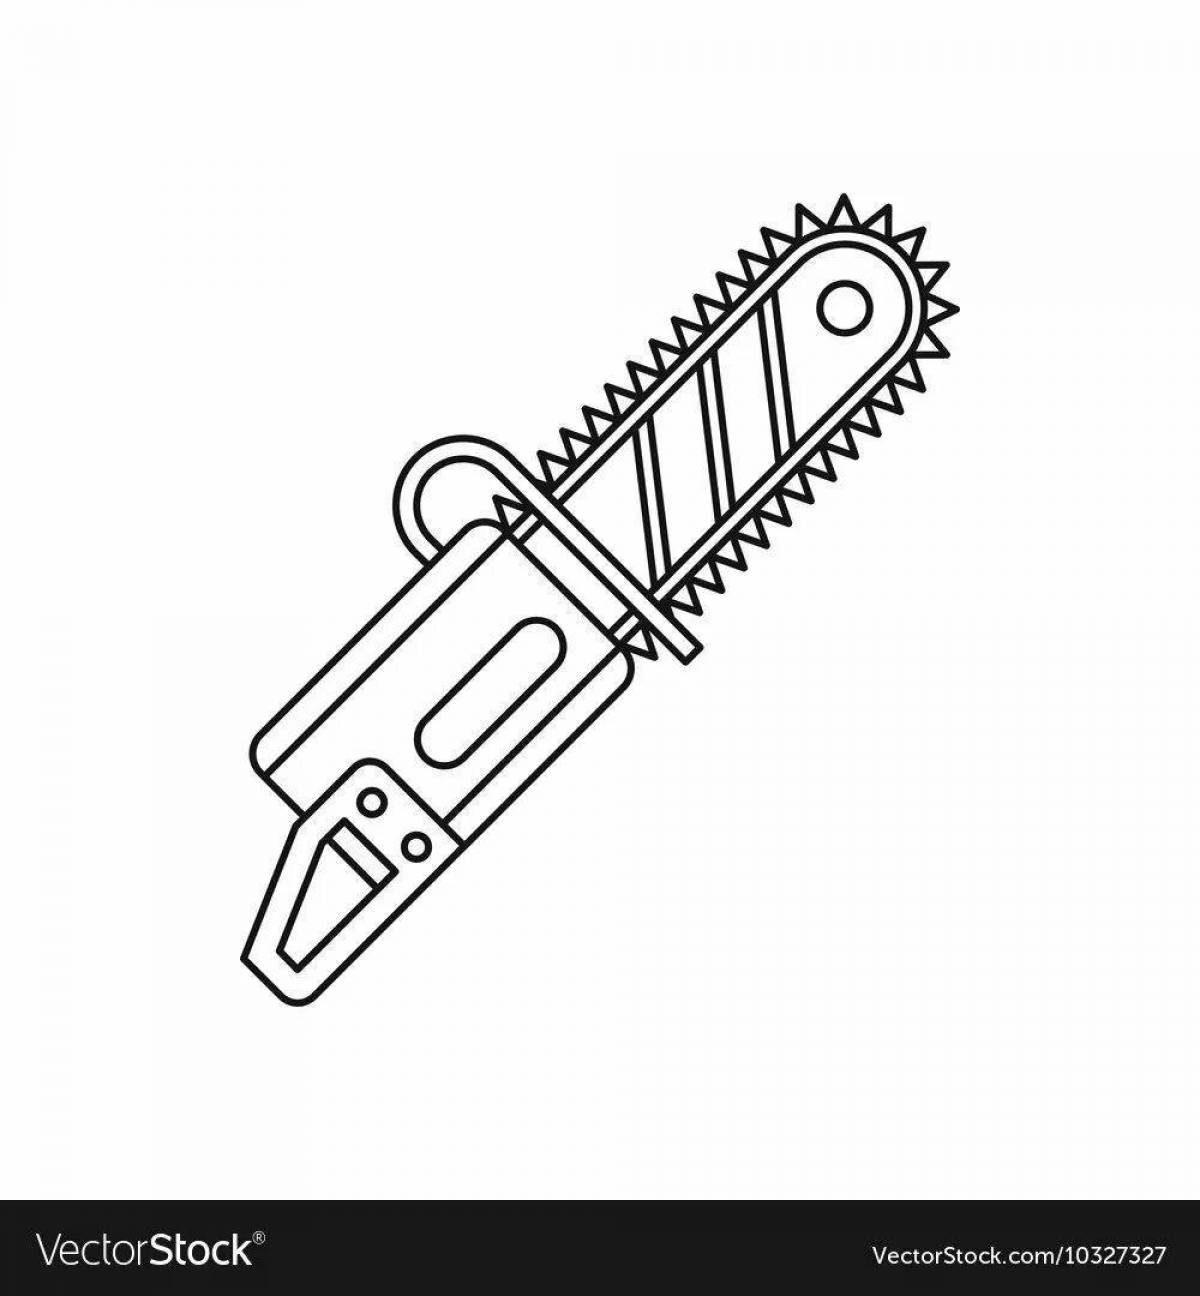 Chainsaw Fun Coloring Page